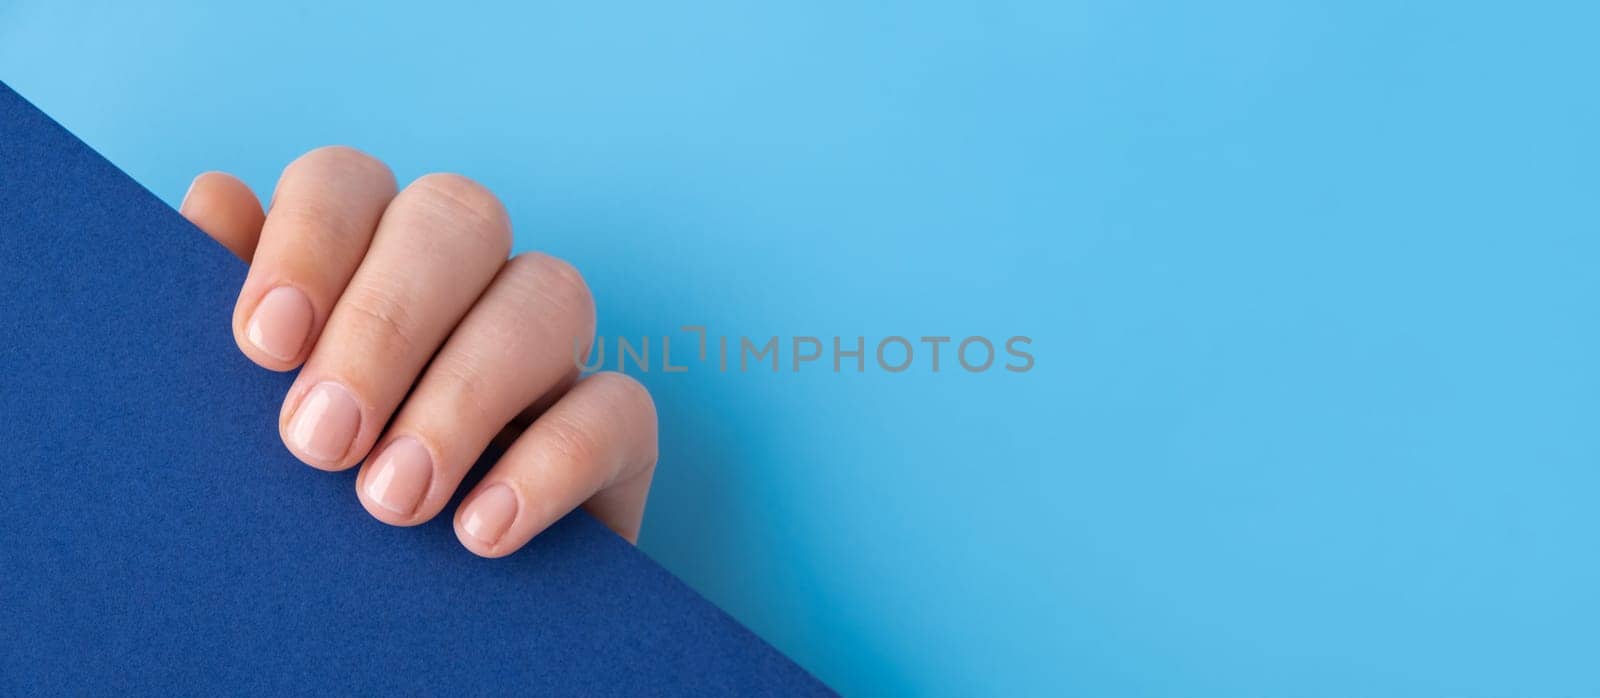 Pastel softness manicured nails on blue background. Mock up template copy space Woman showing her new manicure in colors of pastel palette. Simplicity decor fresh spring vibes earth-colored neutral tones by anna_stasiia